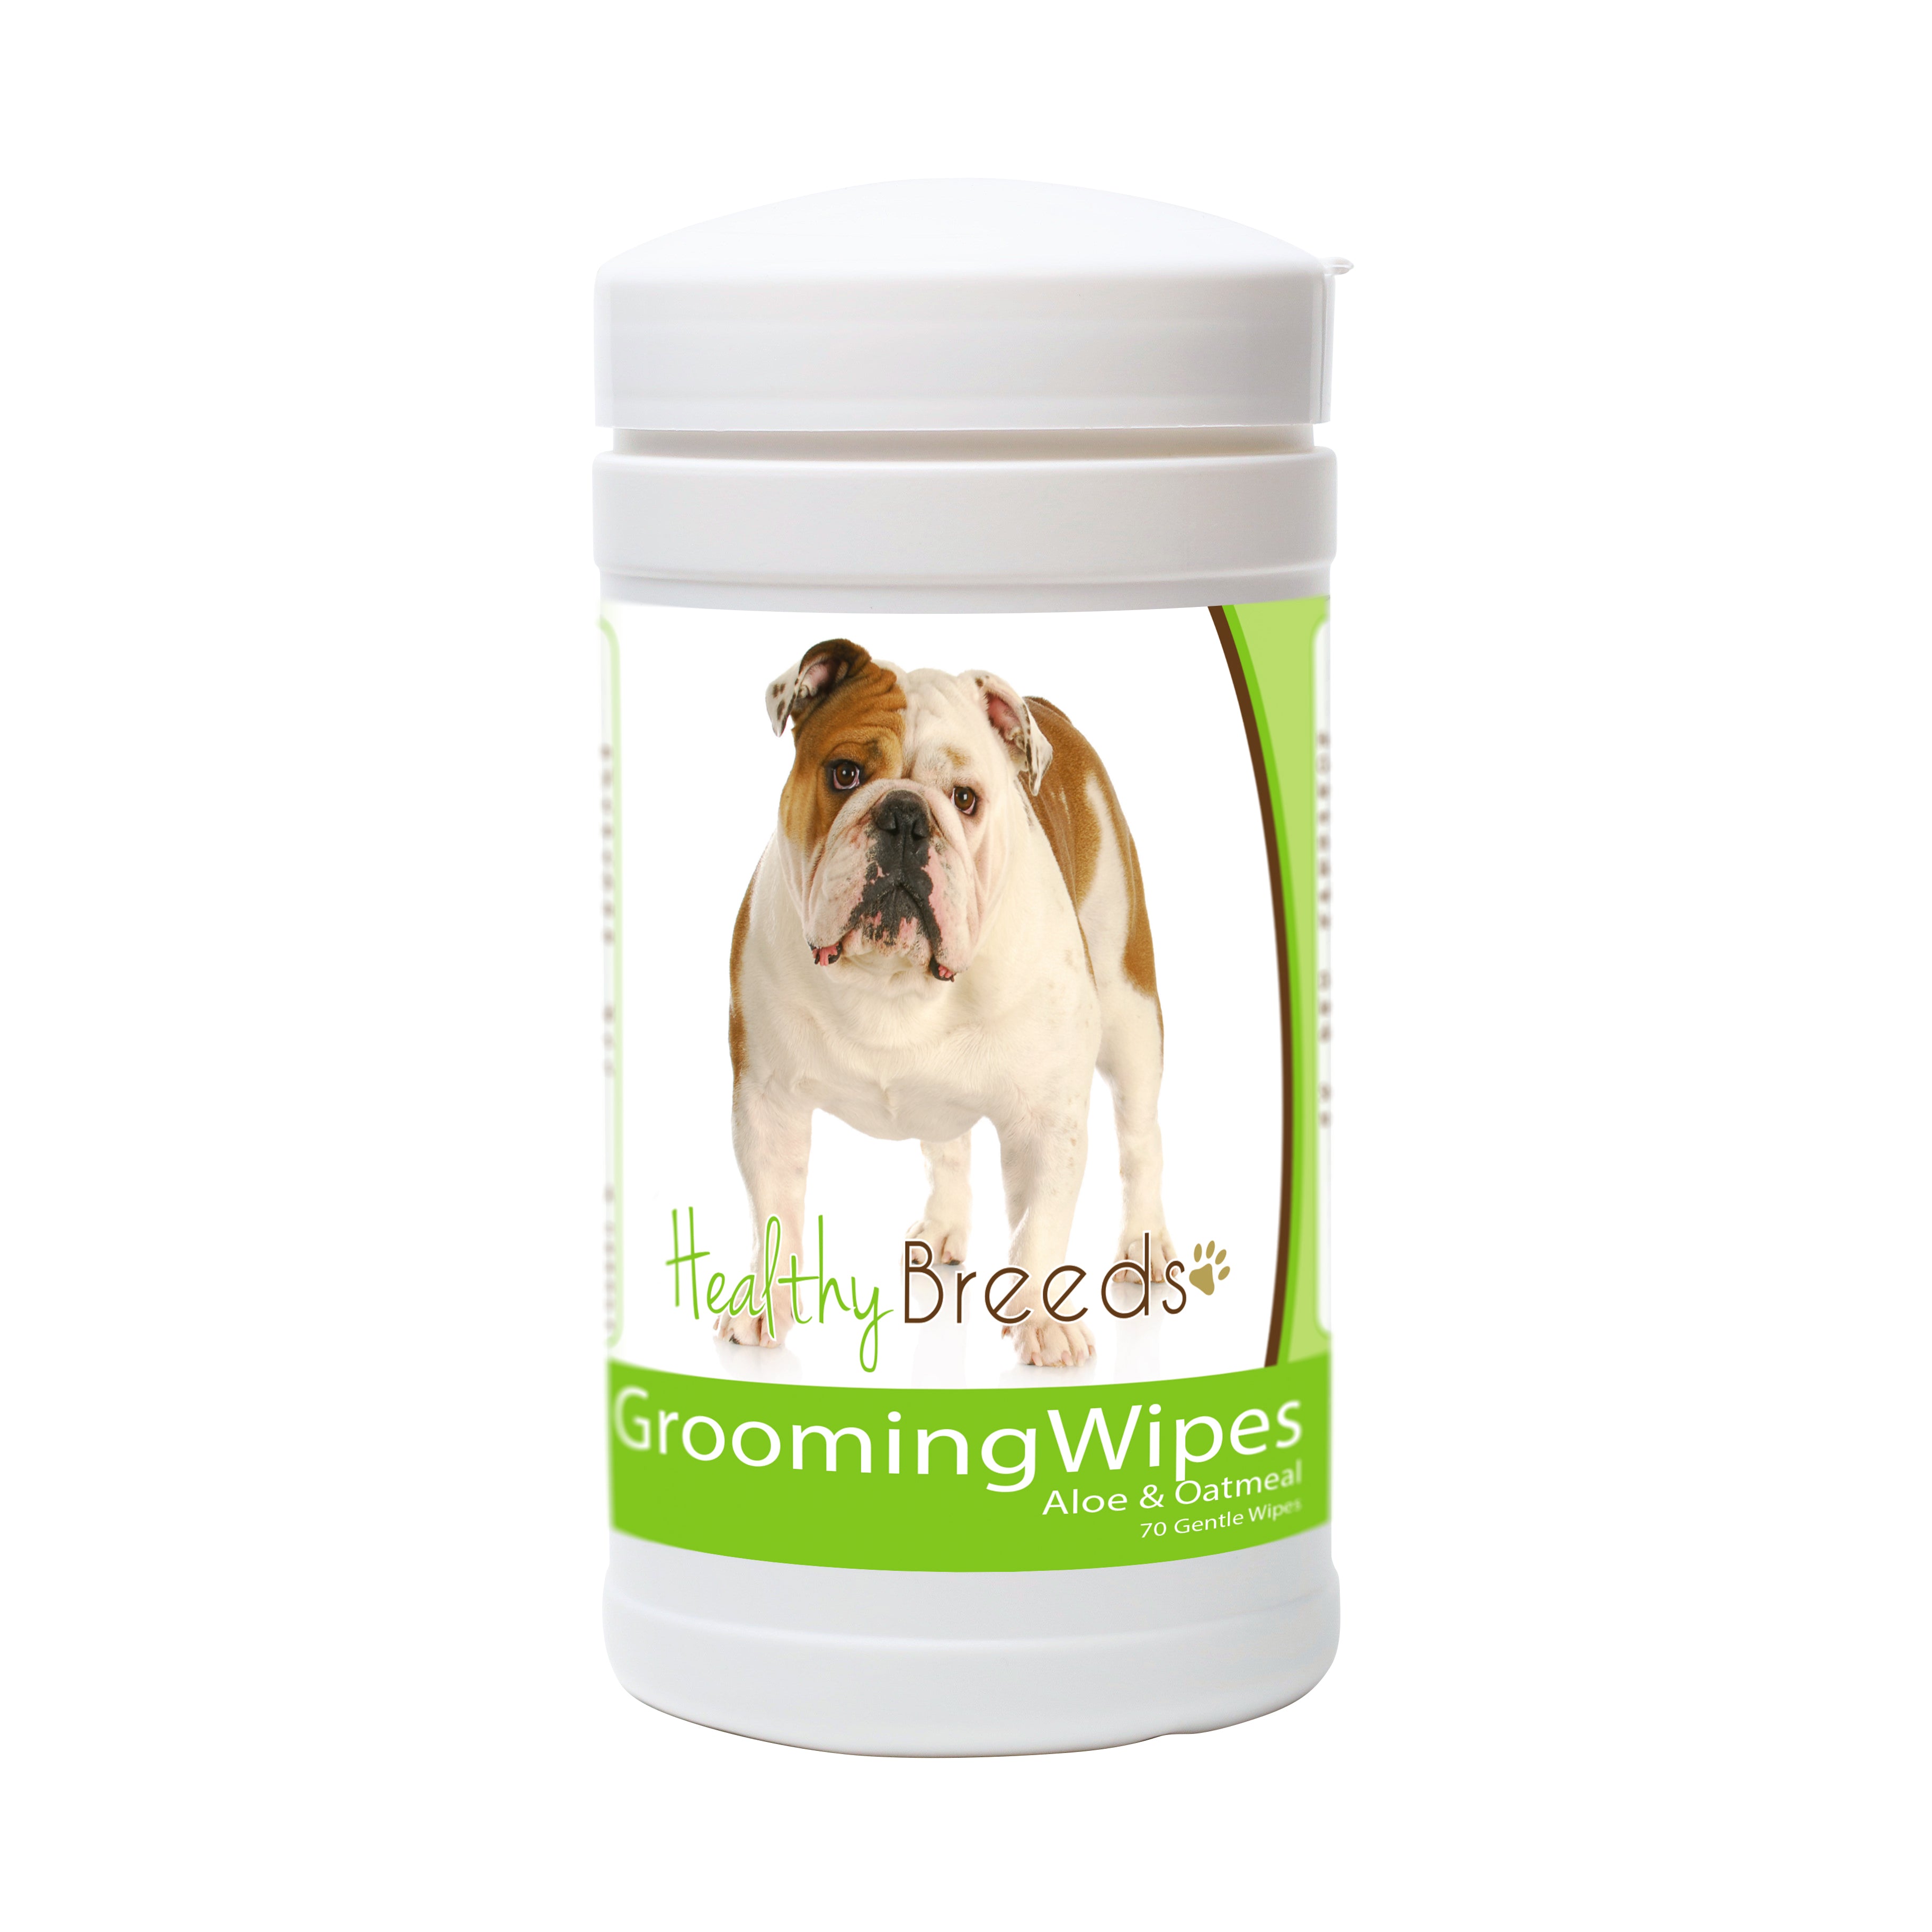 Bulldog Grooming Wipes 70 Count